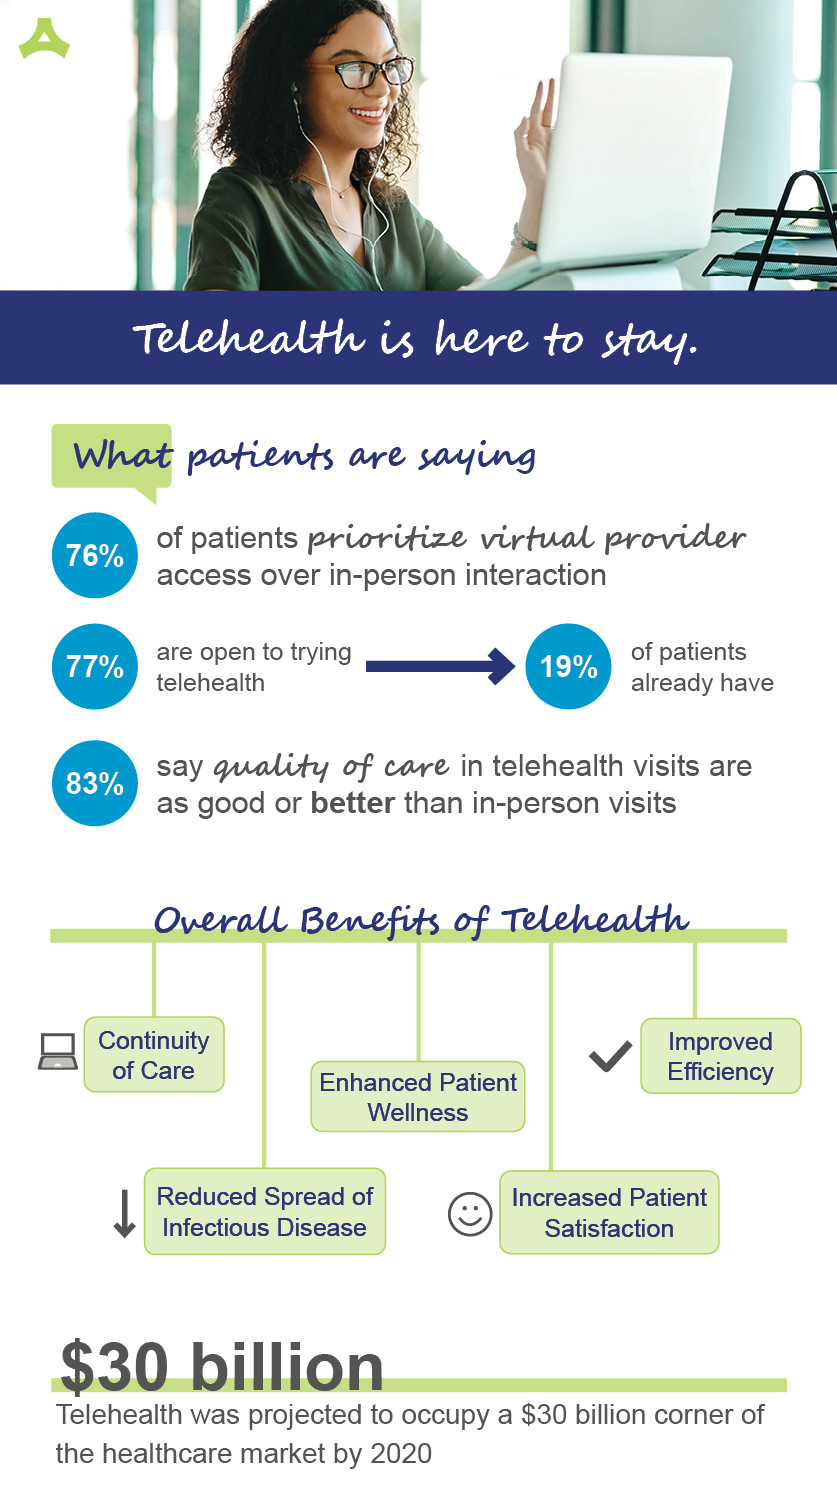 telehealth is here to stay